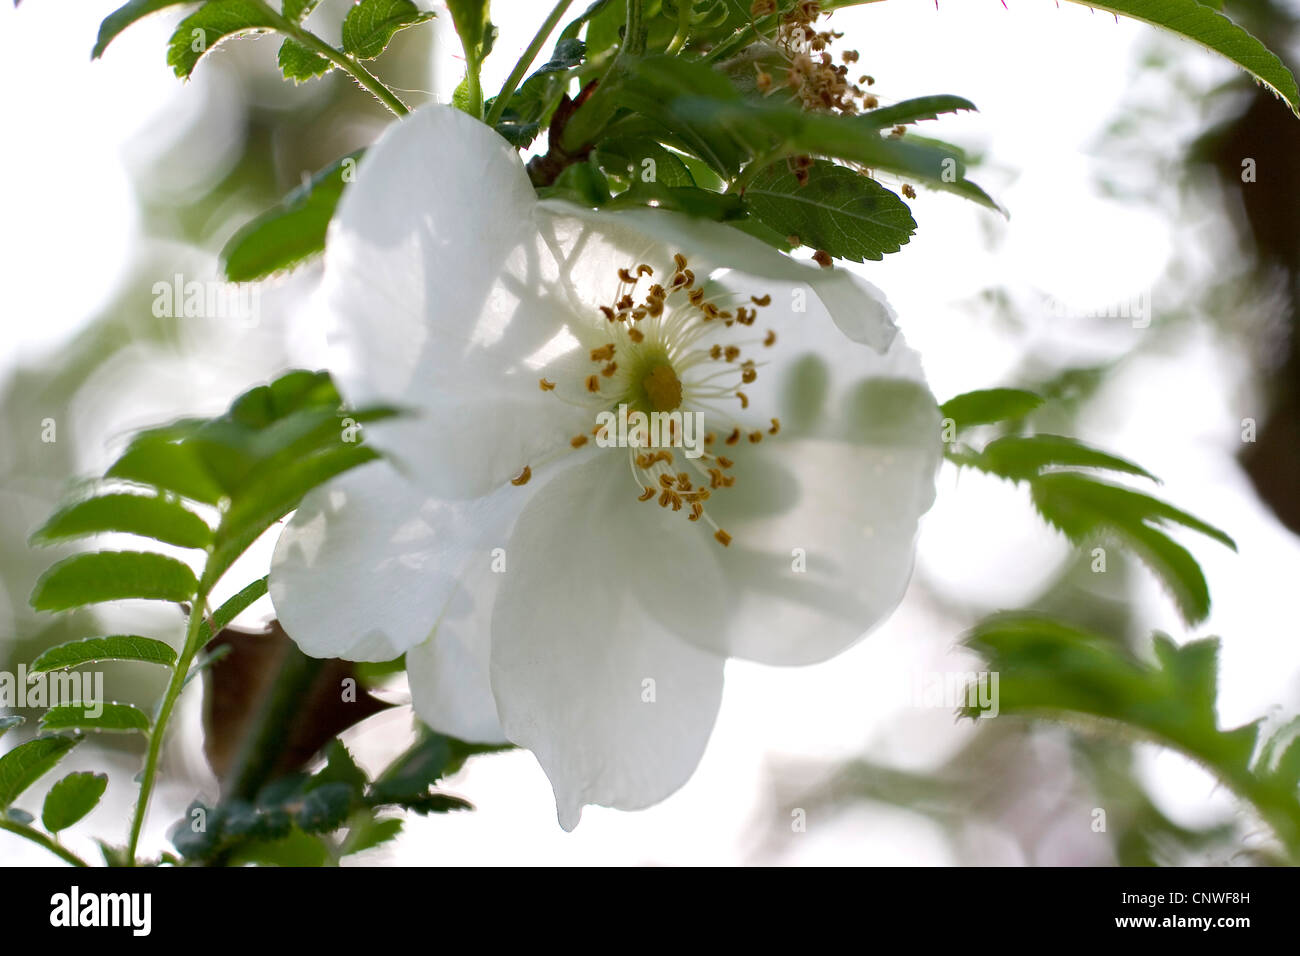 mountain omei rose (Rosa omeiensis), blooming Stock Photo